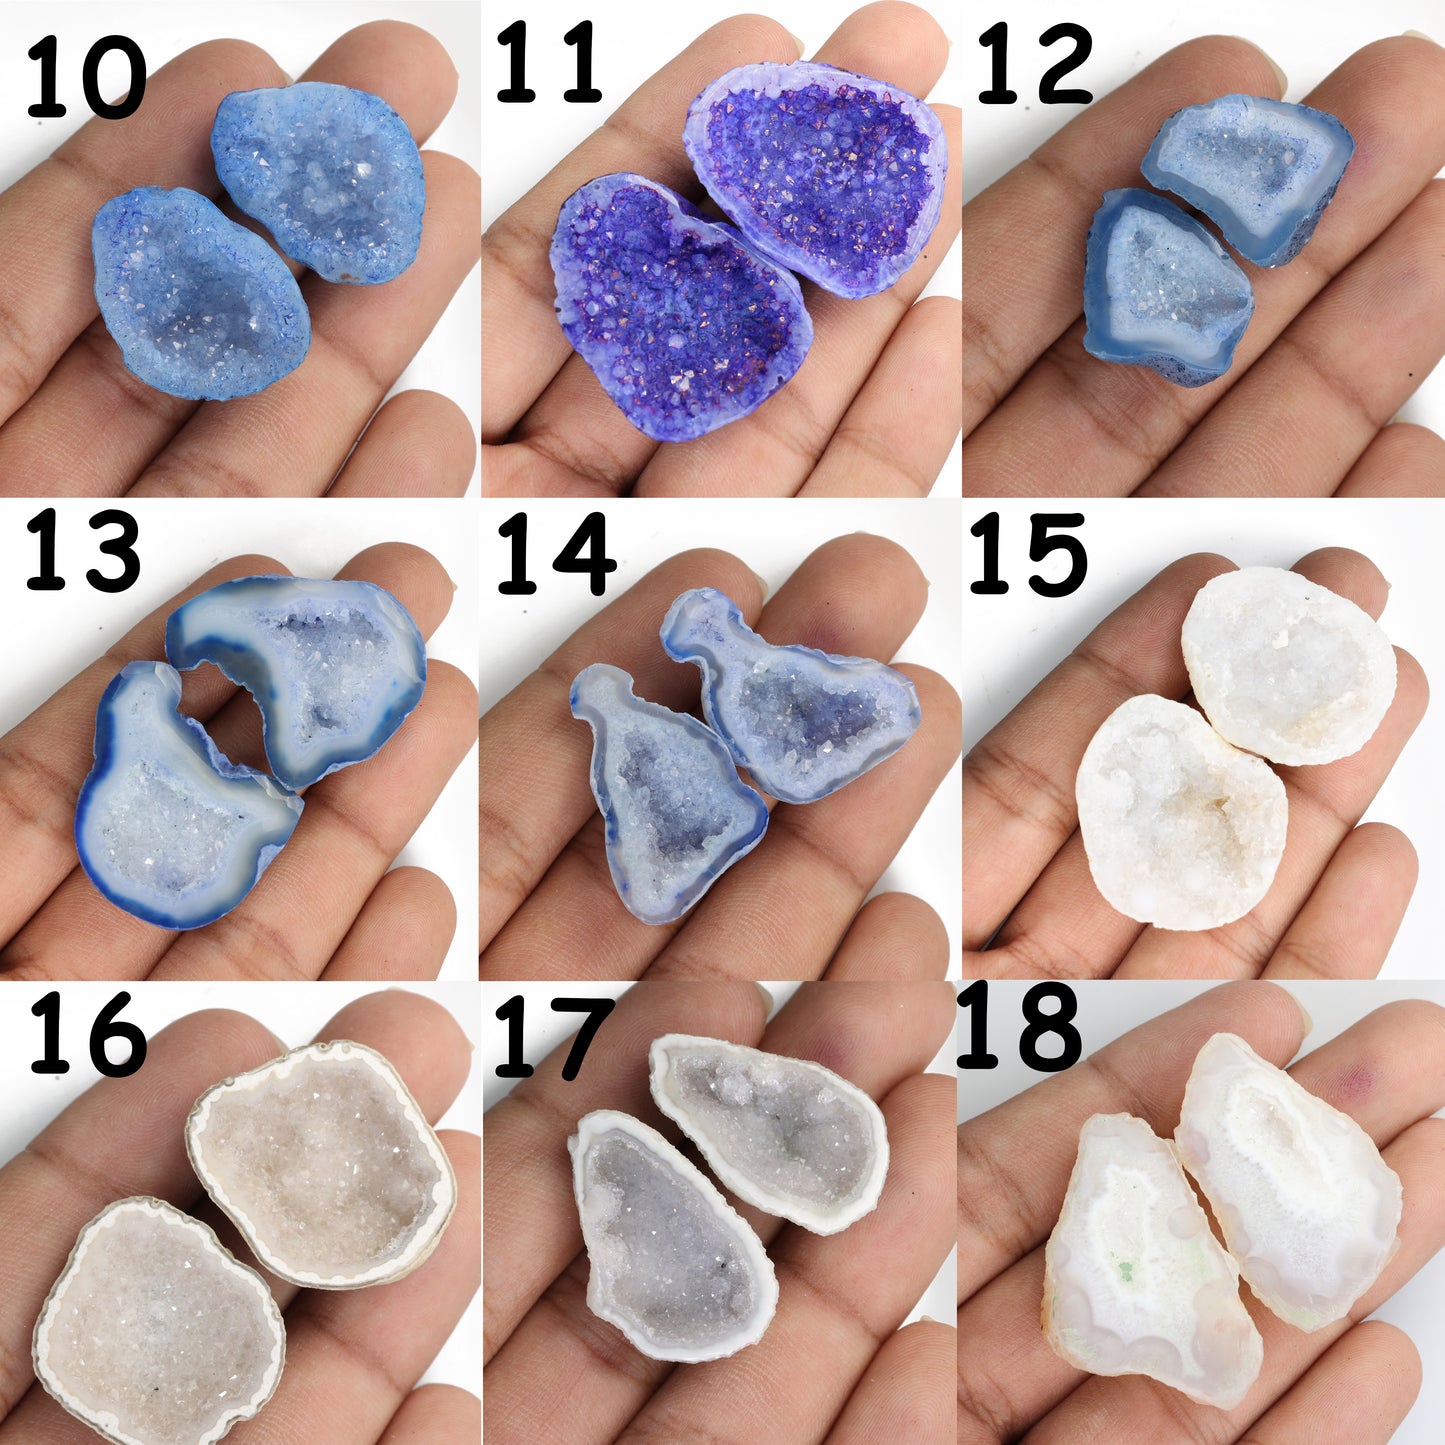 Geode druzy pair stone mix color for customize ***You can Order Exact Piece as in Photos***